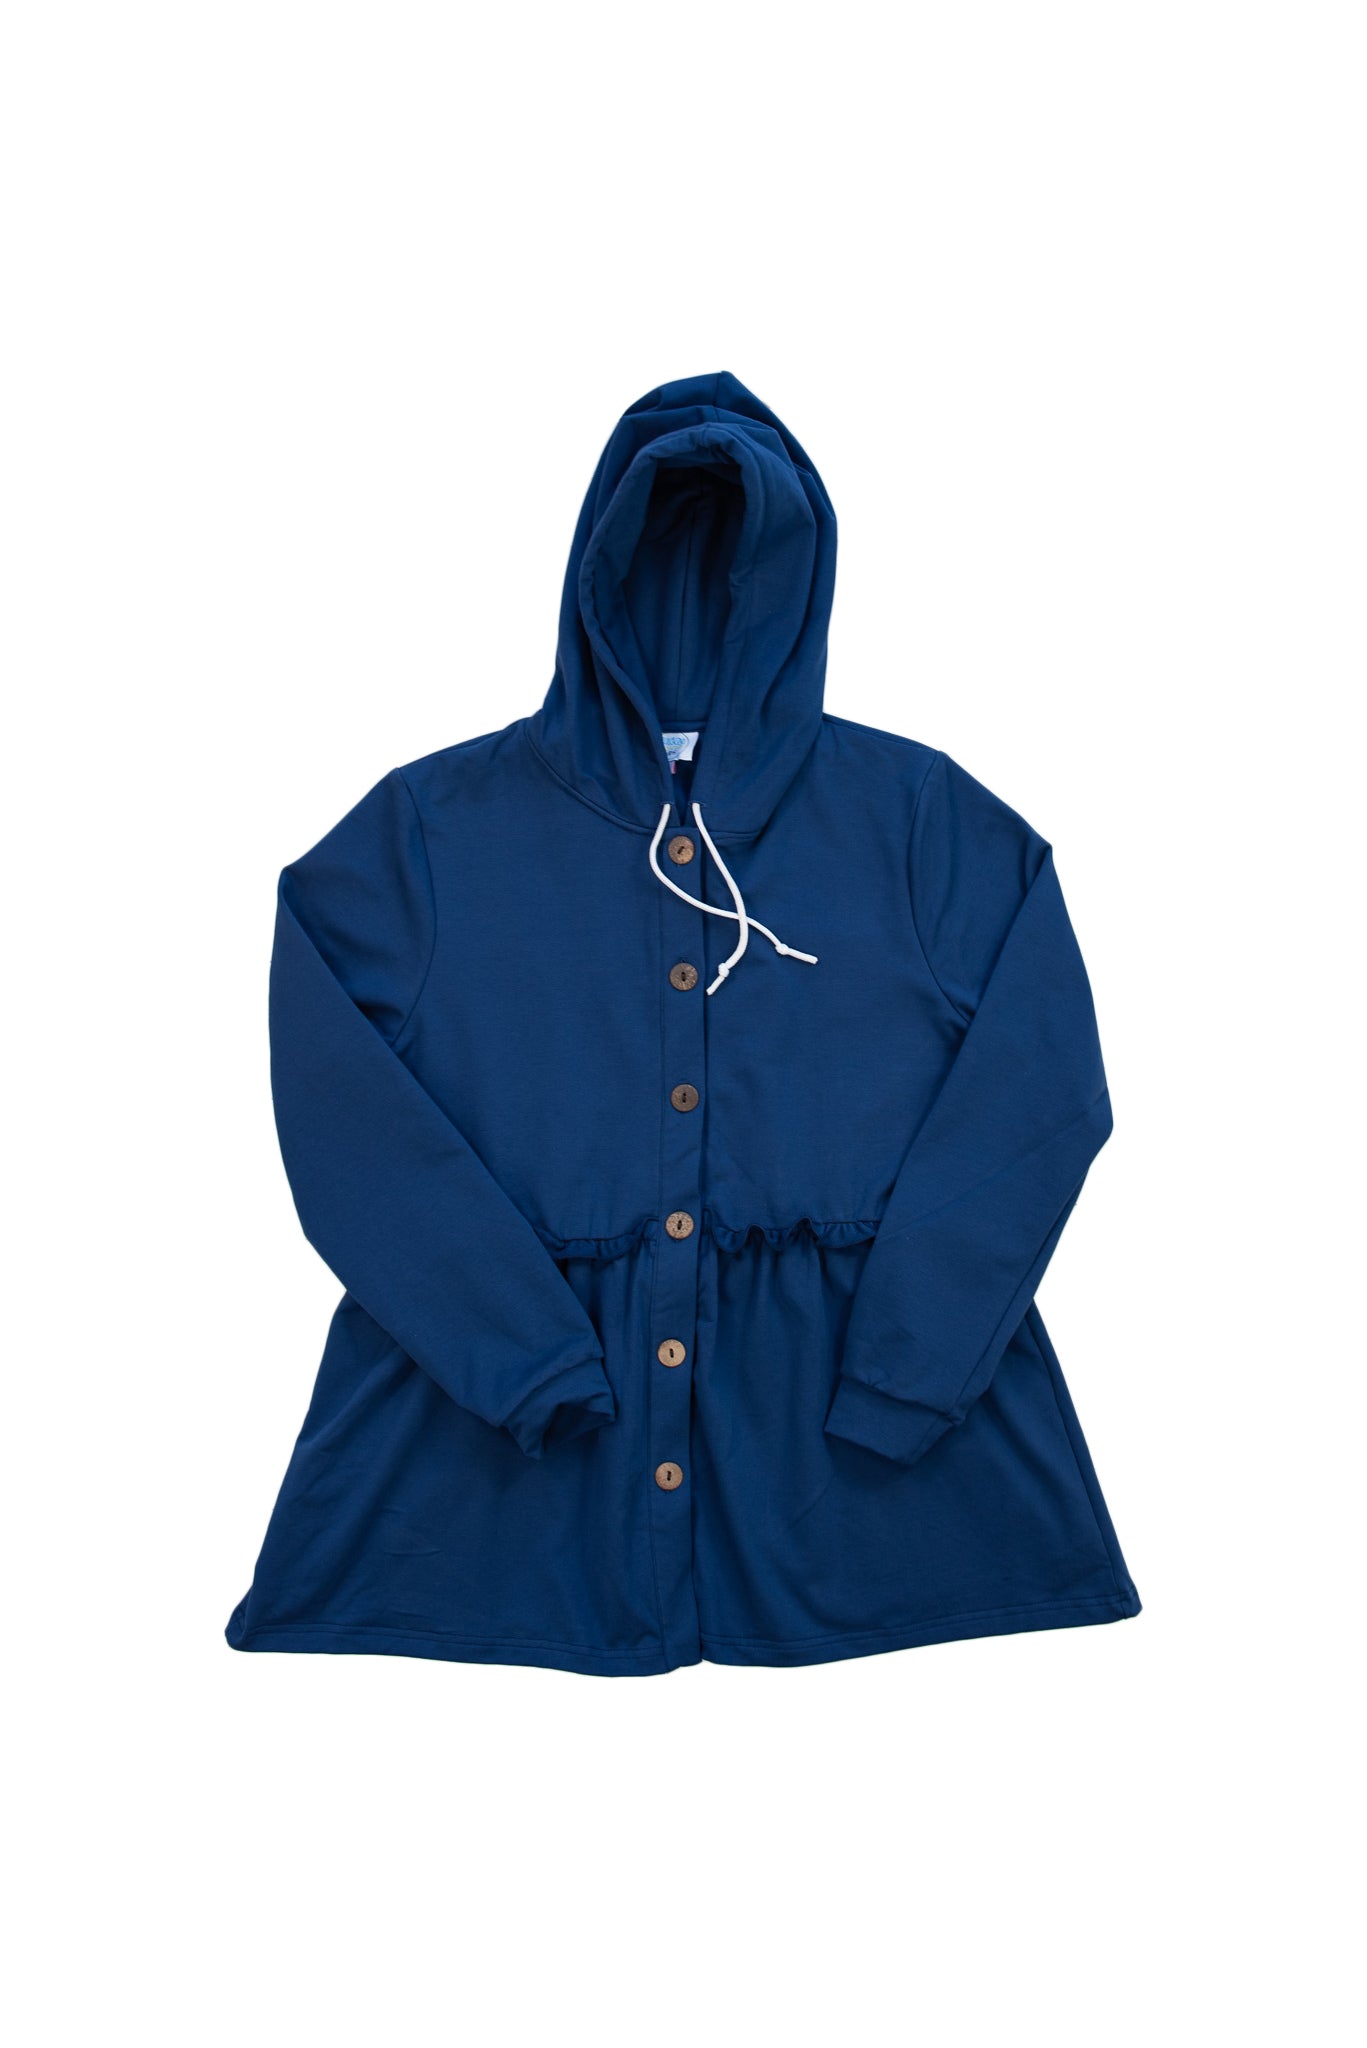 Mom Classic Comfy Hooded Jacket